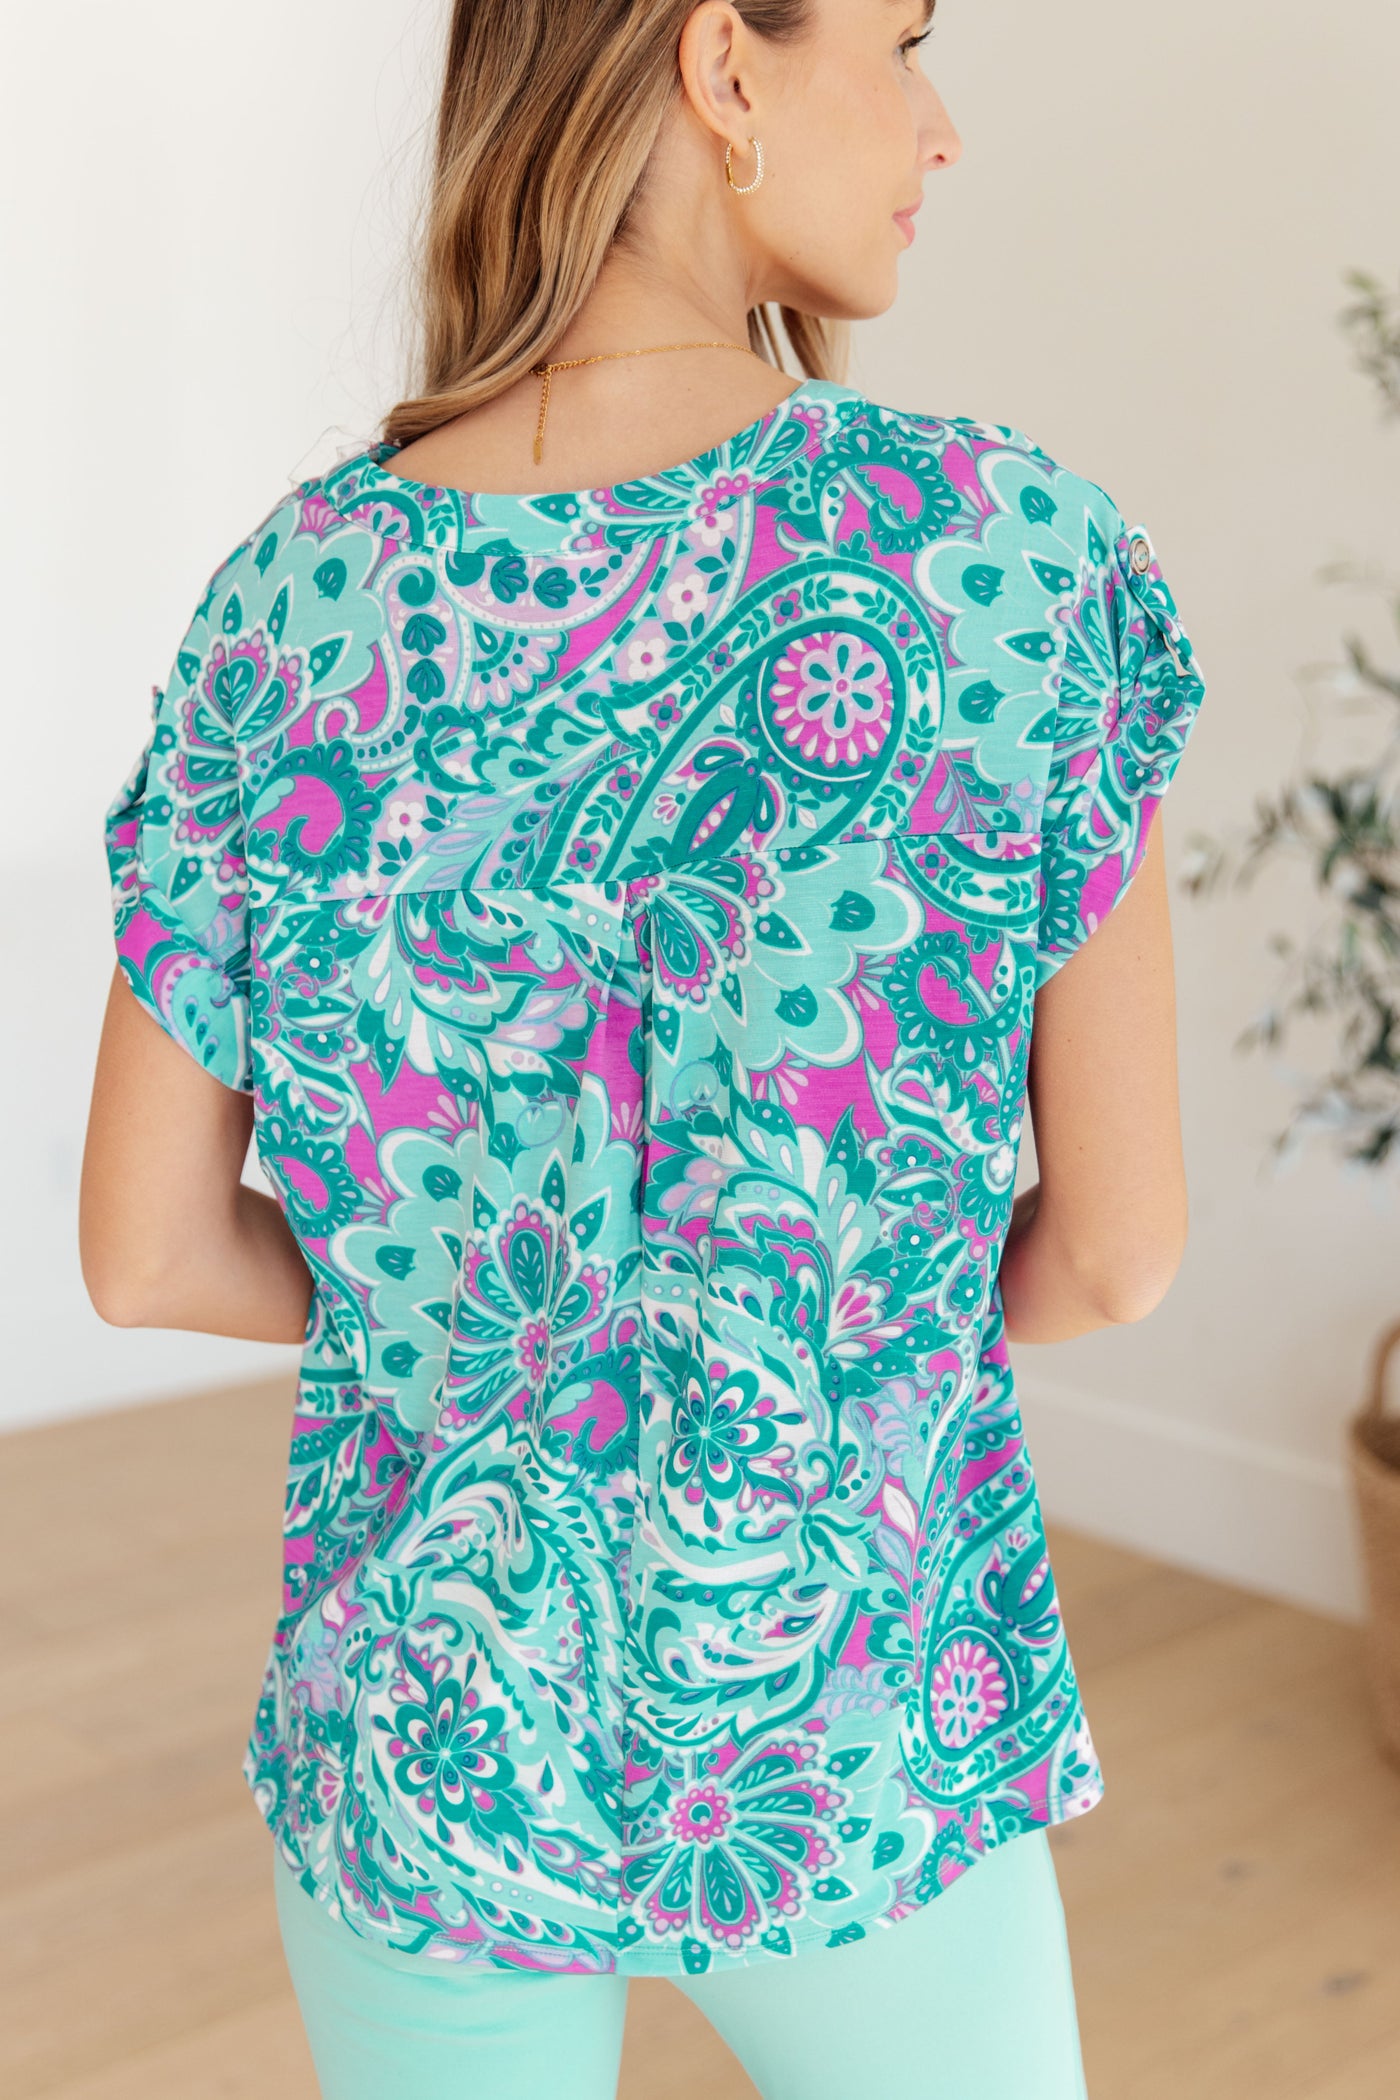 Lizzy Cap Sleeve Top in Magenta and Teal Paisley-Womens-Ave Shops-Market Street Nest, Fashionable Clothing, Shoes and Home Décor Located in Mabank, TX